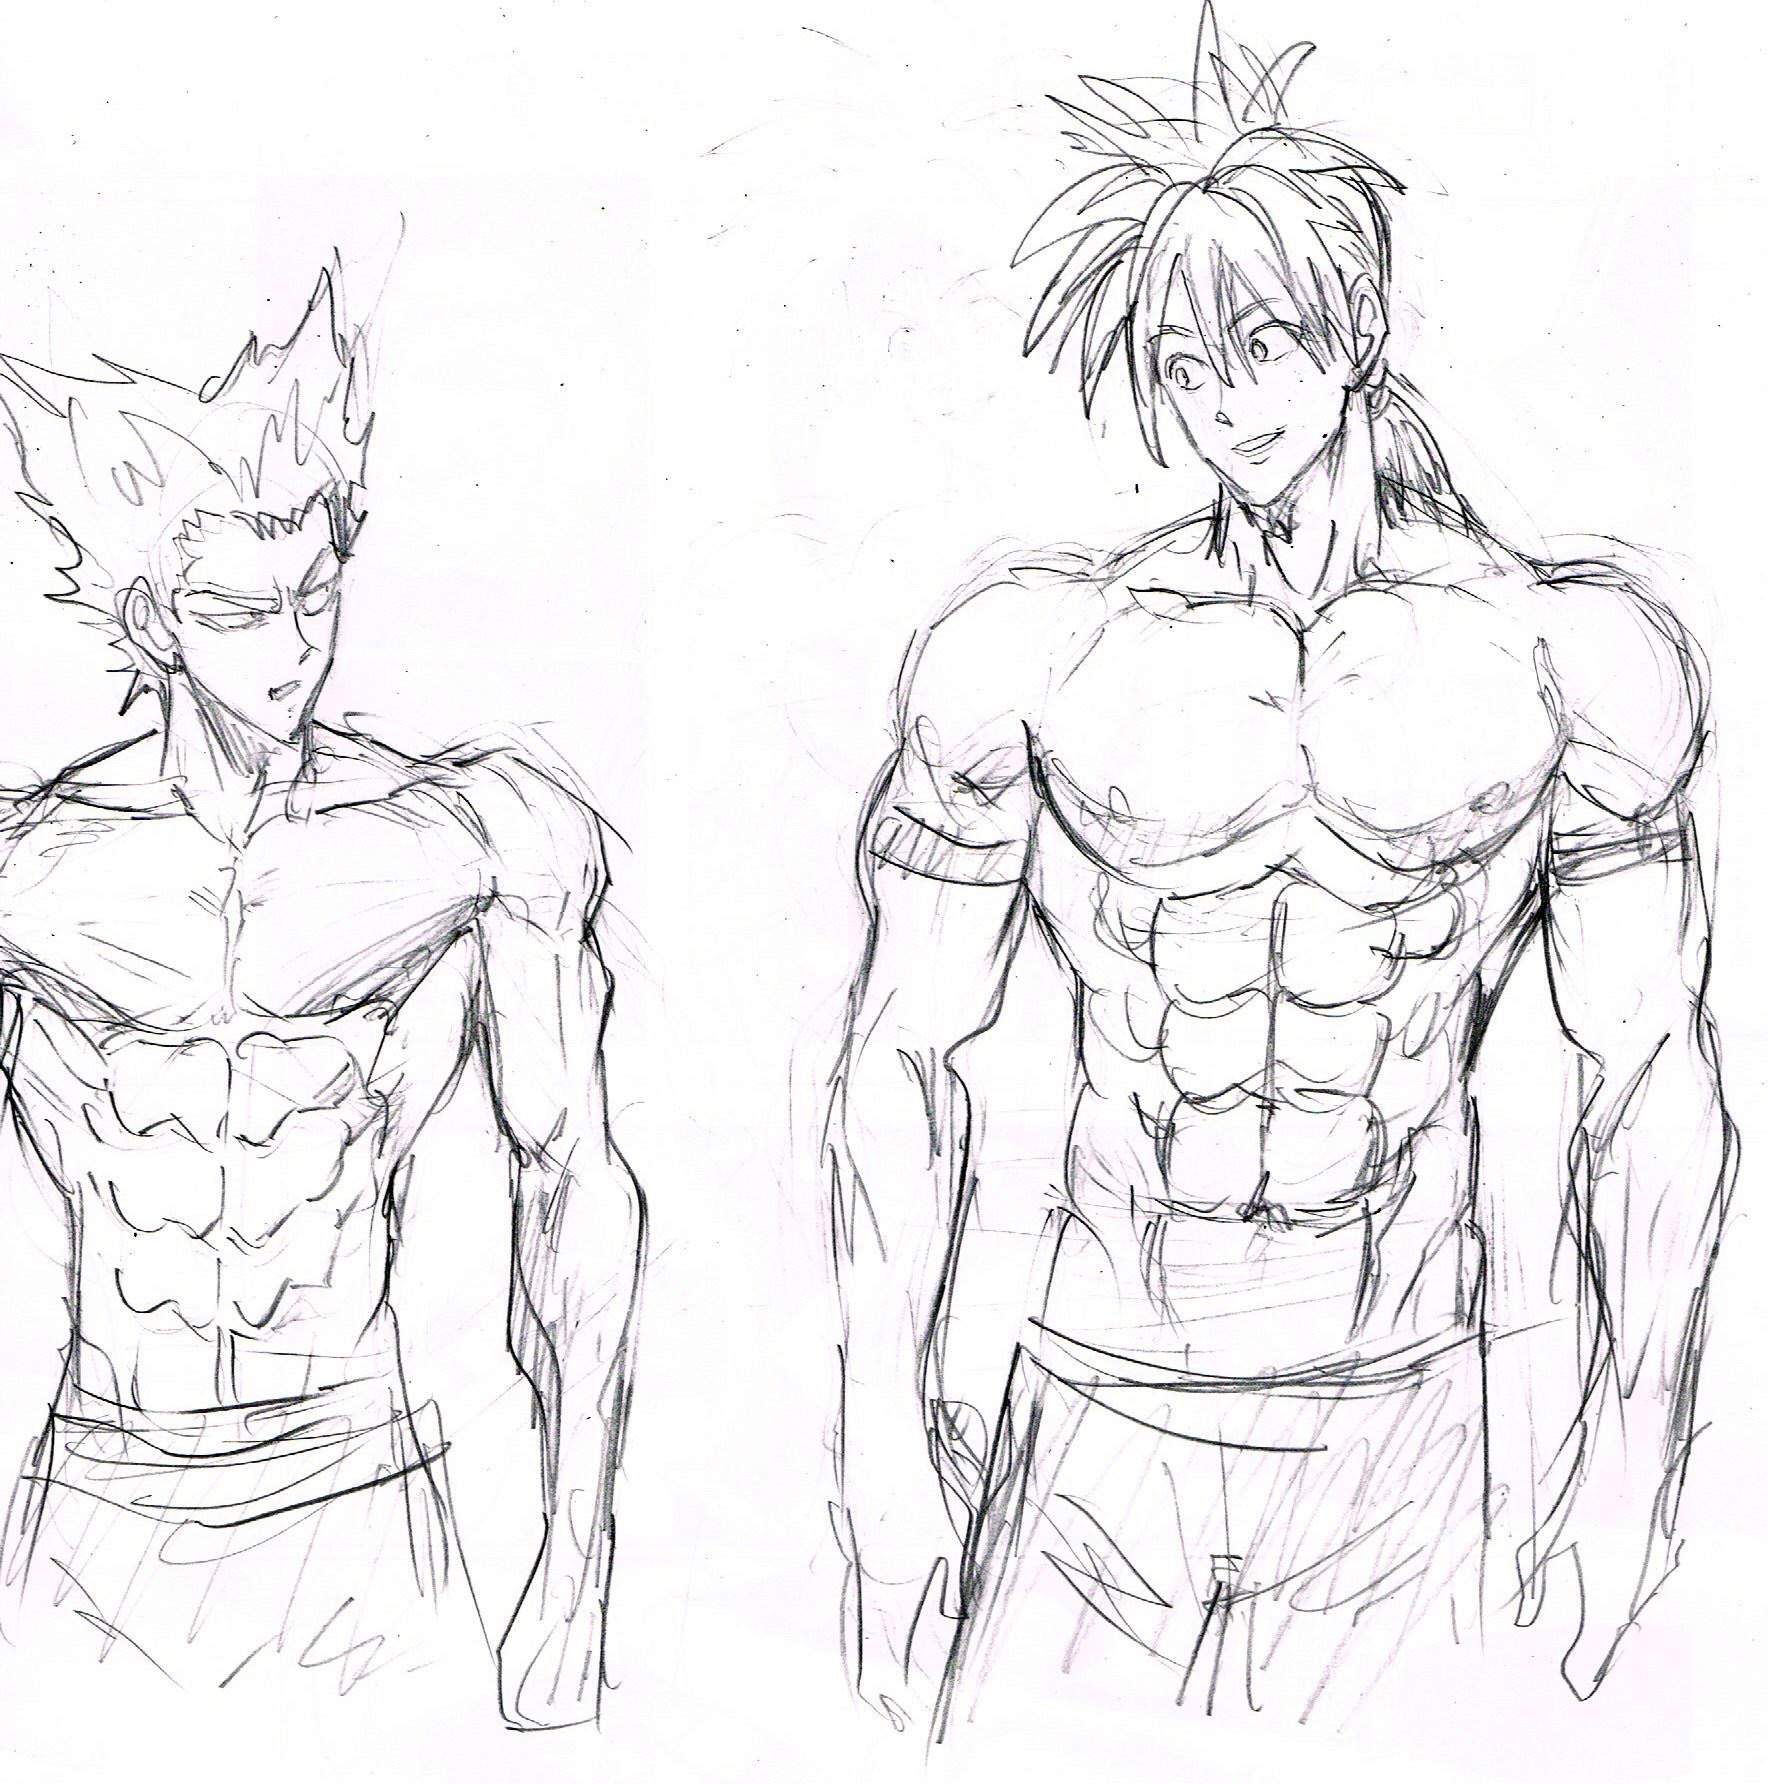 This is a physique and size comparison between Suiryu and Garou. 